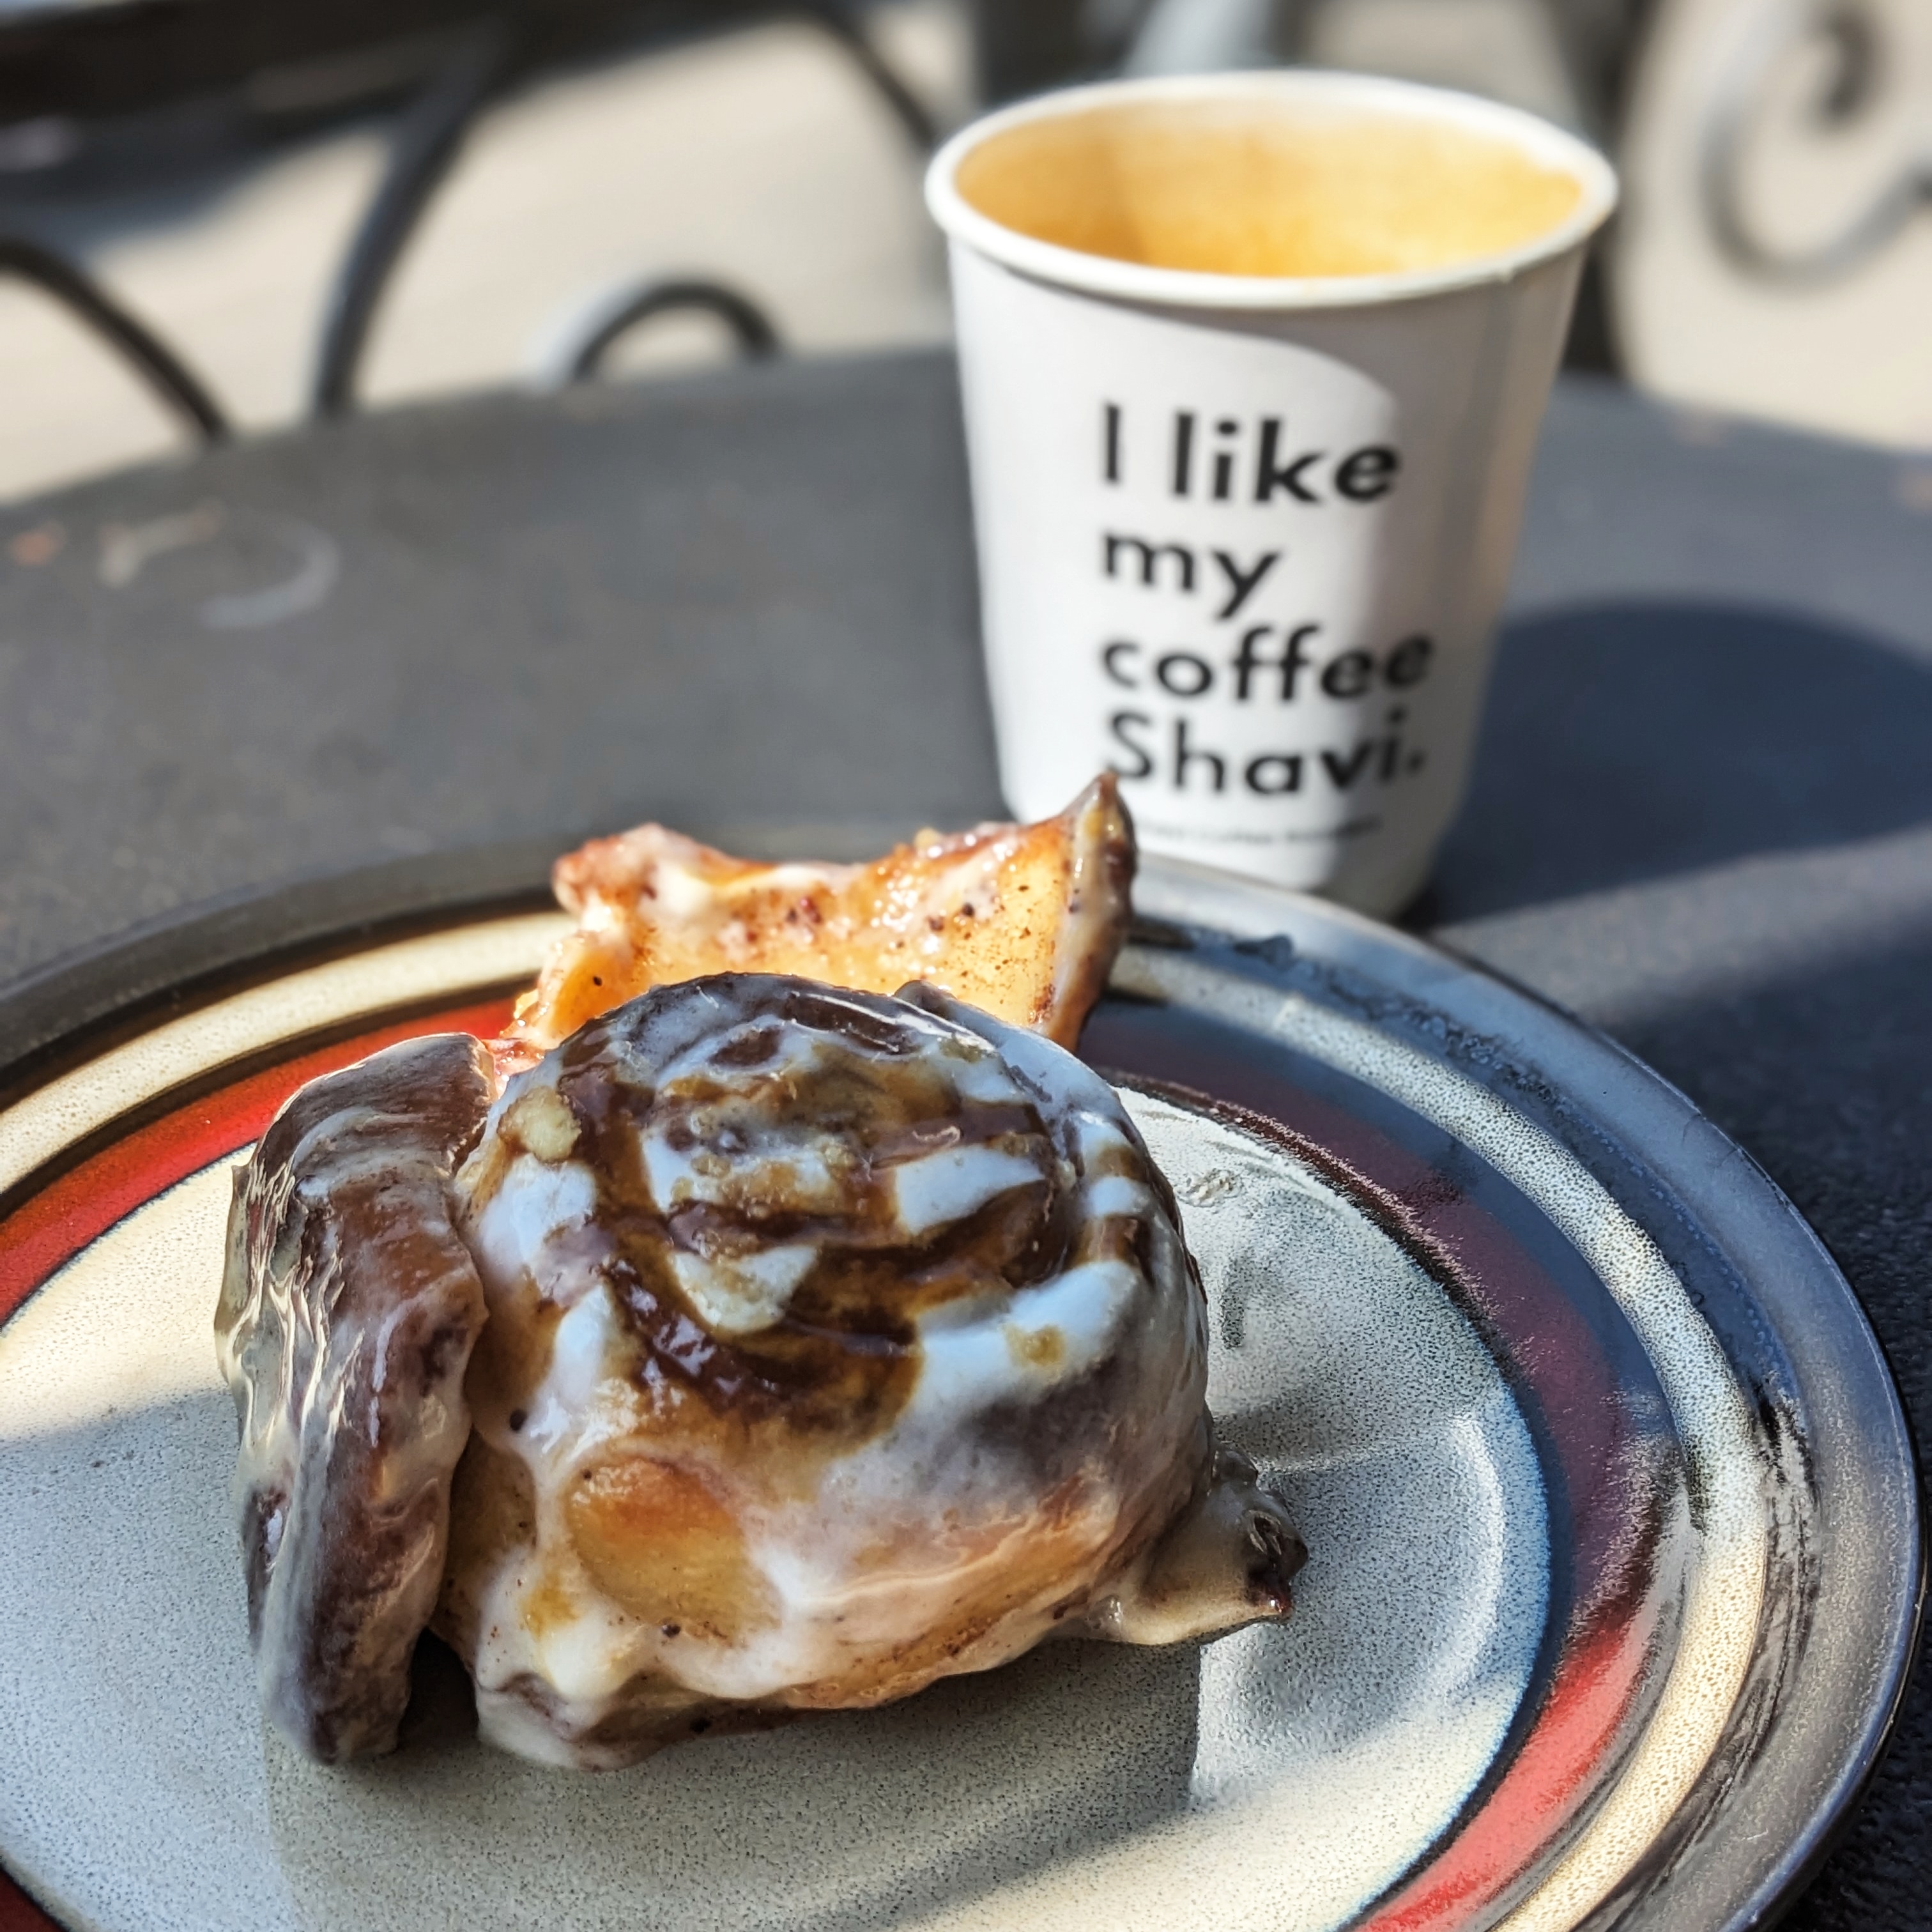 An iced cinnamon bun and a flat white in a take-out cup from Shavi Coffee Roasters, one of the best cafes in Tbilisi